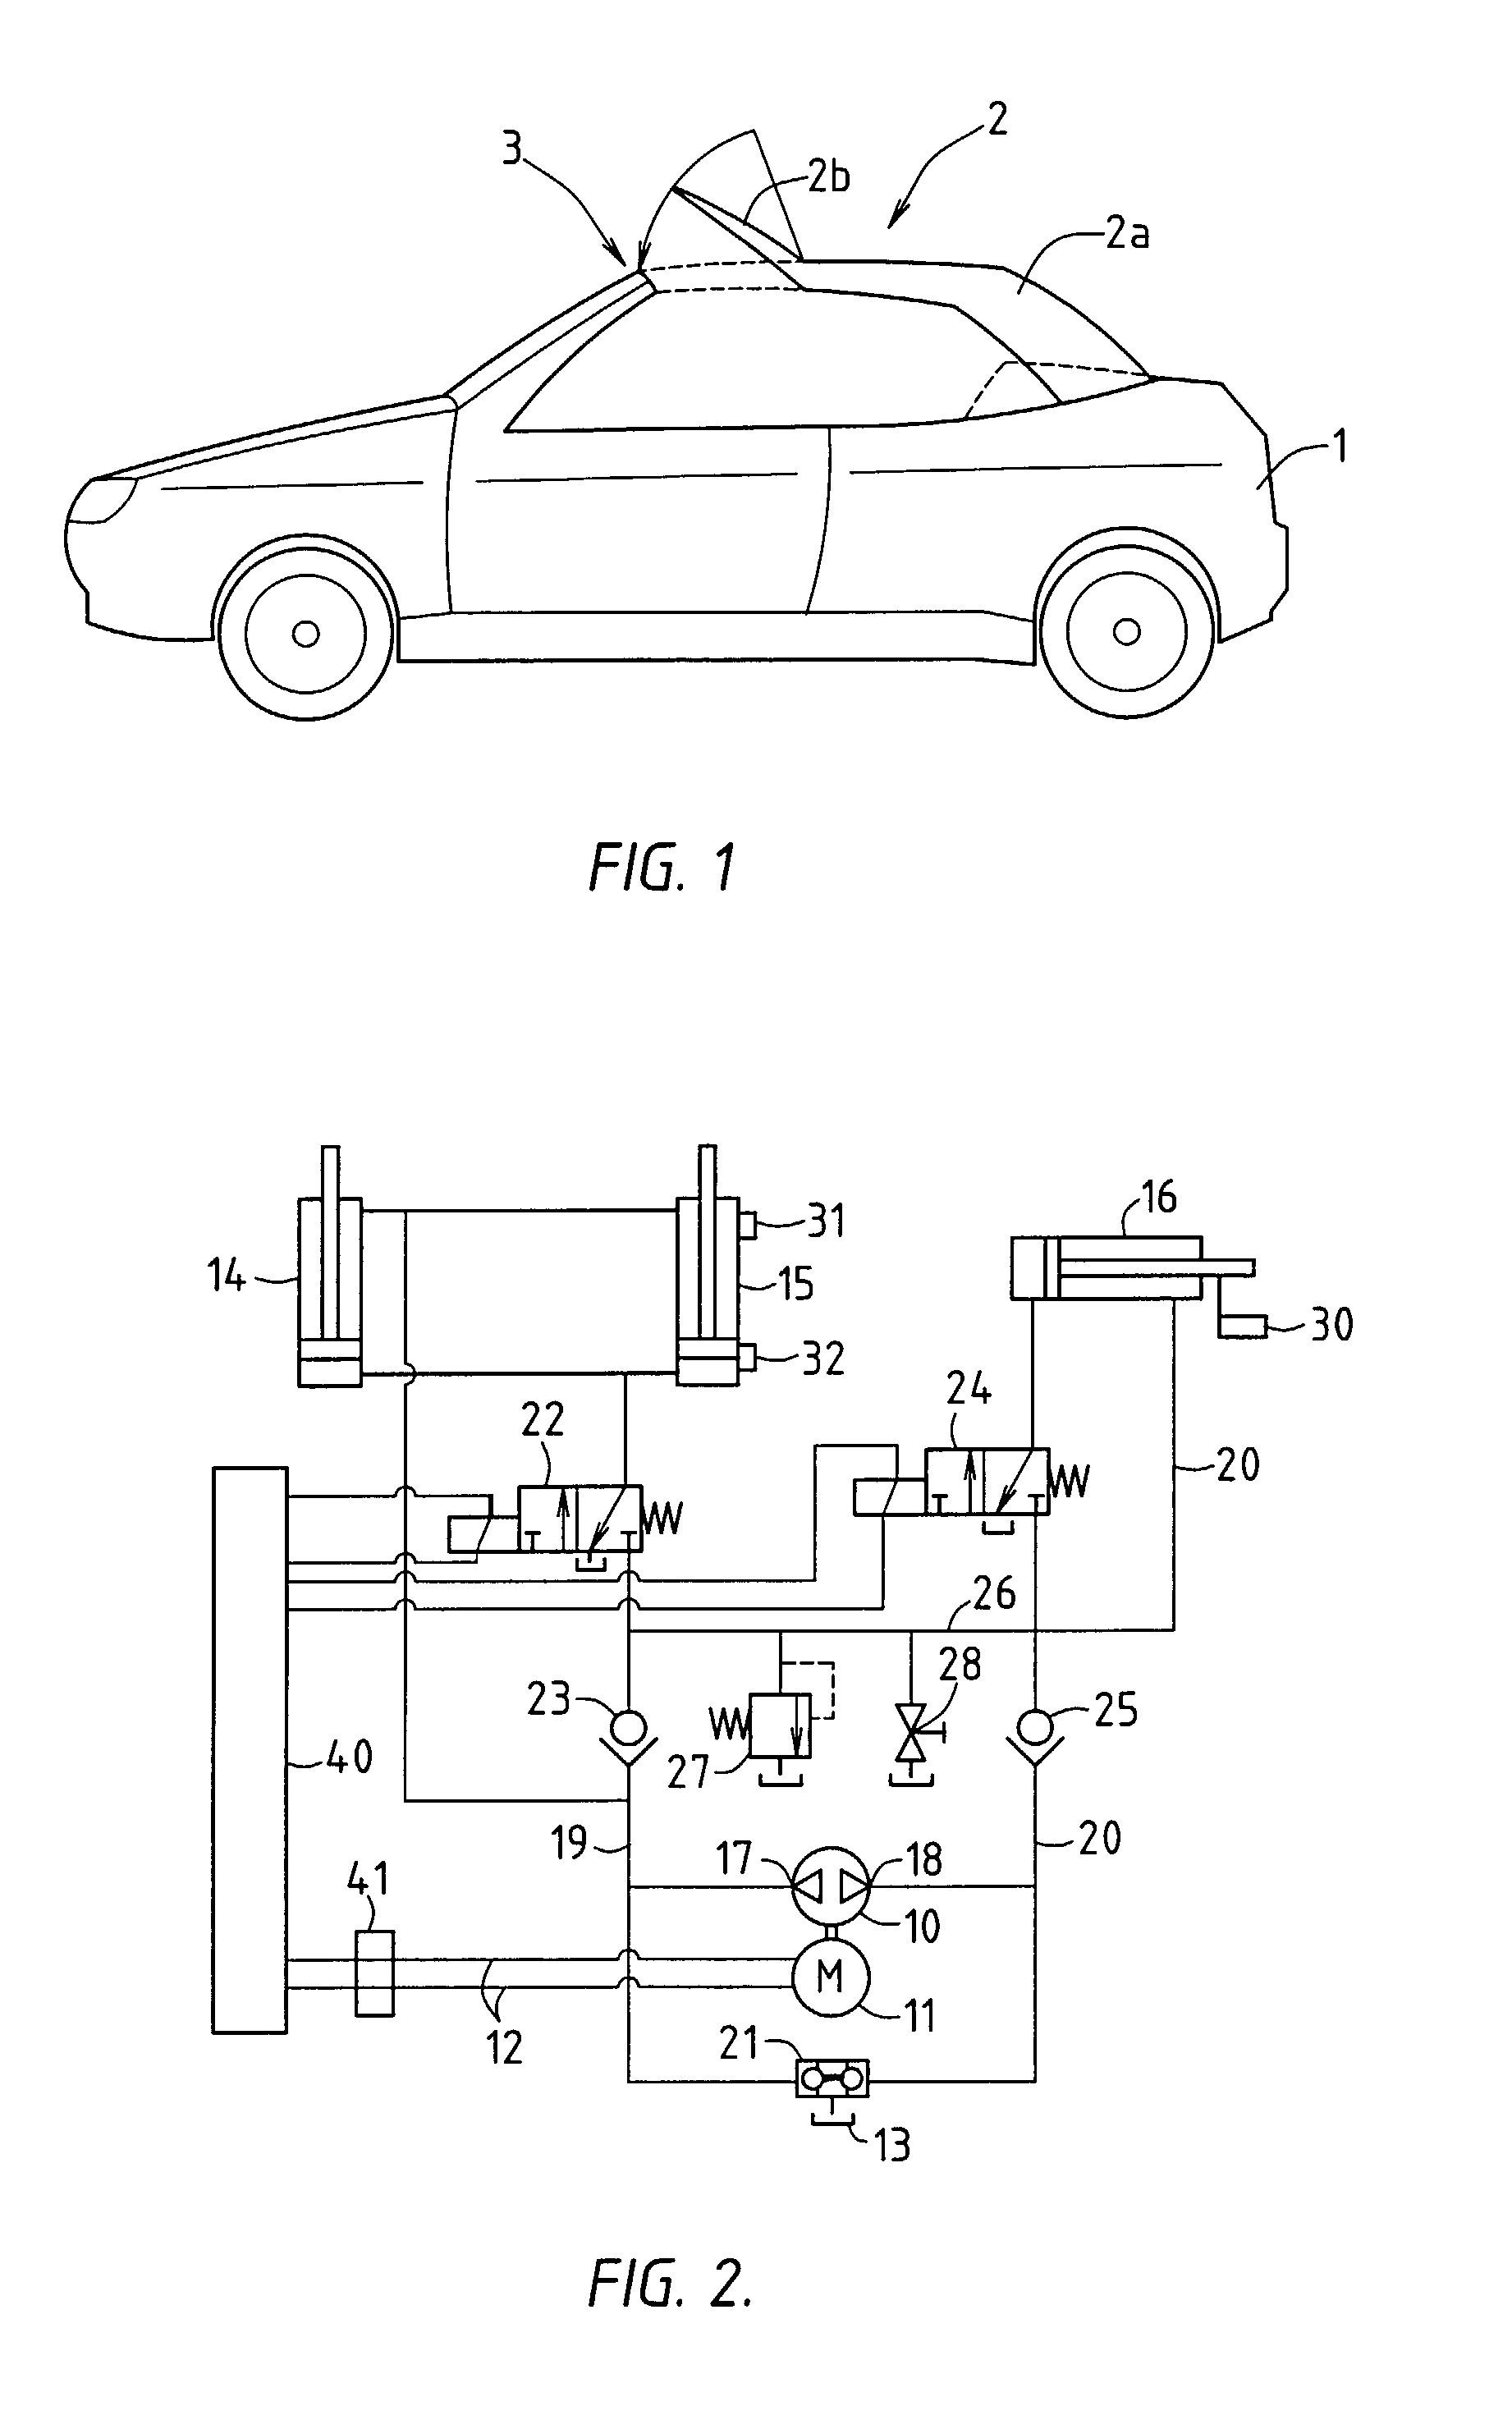 Hydraulic actuating device for a convertible top assembly of a vehicle